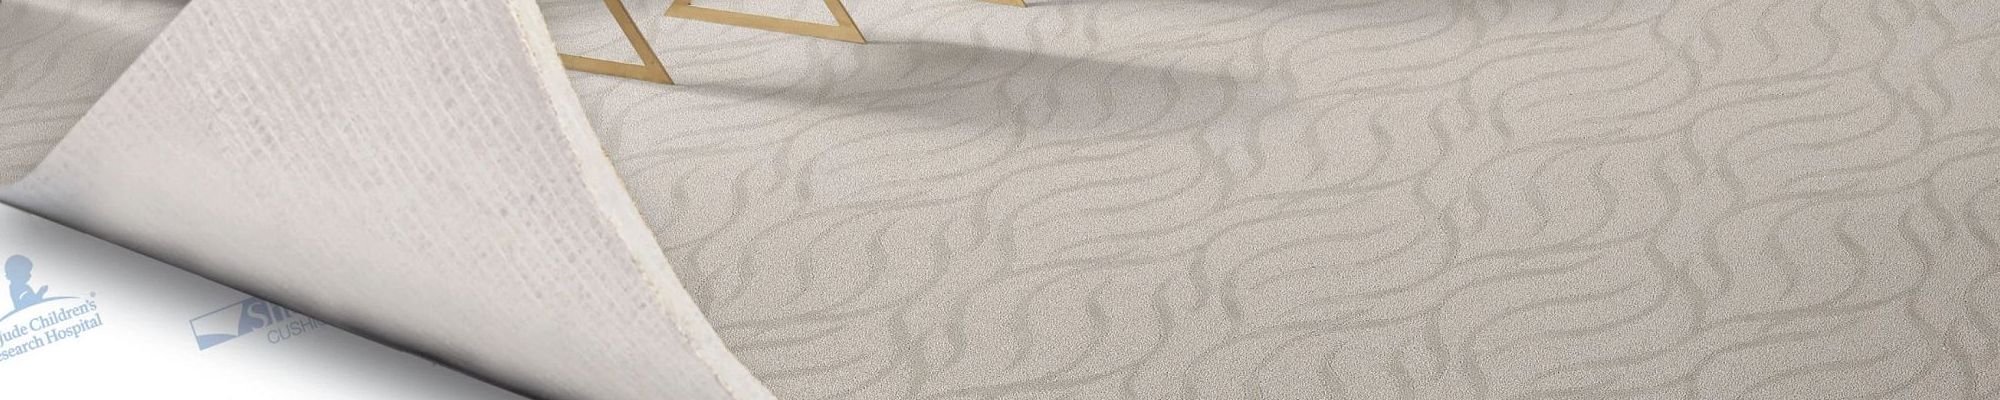 st. jude carpet cushion from Perge Carpet & Floors in Wheaton, MD